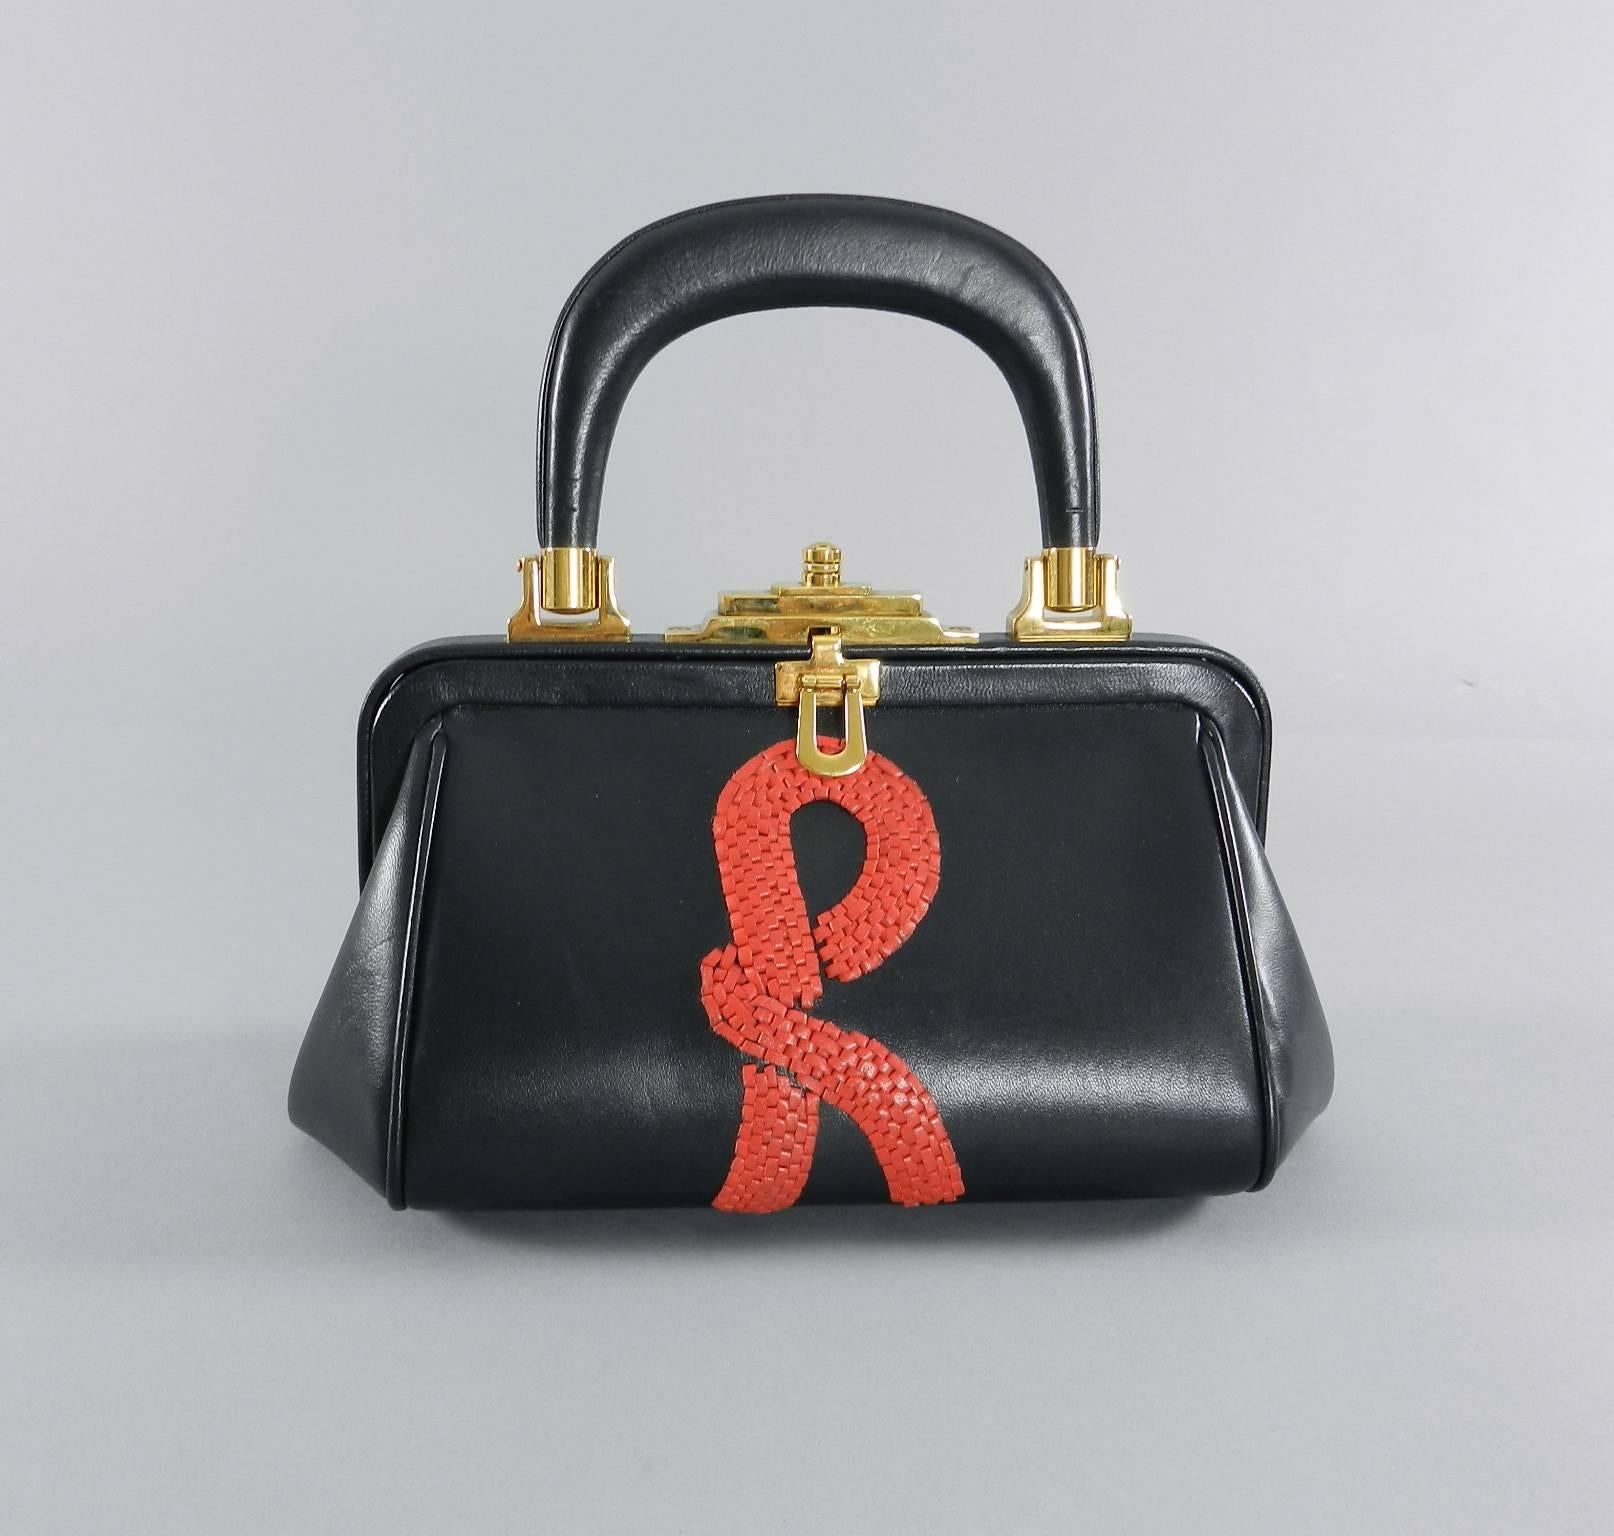 Women's Roberta di Camerino vintage style leather bag with red Woven R logo